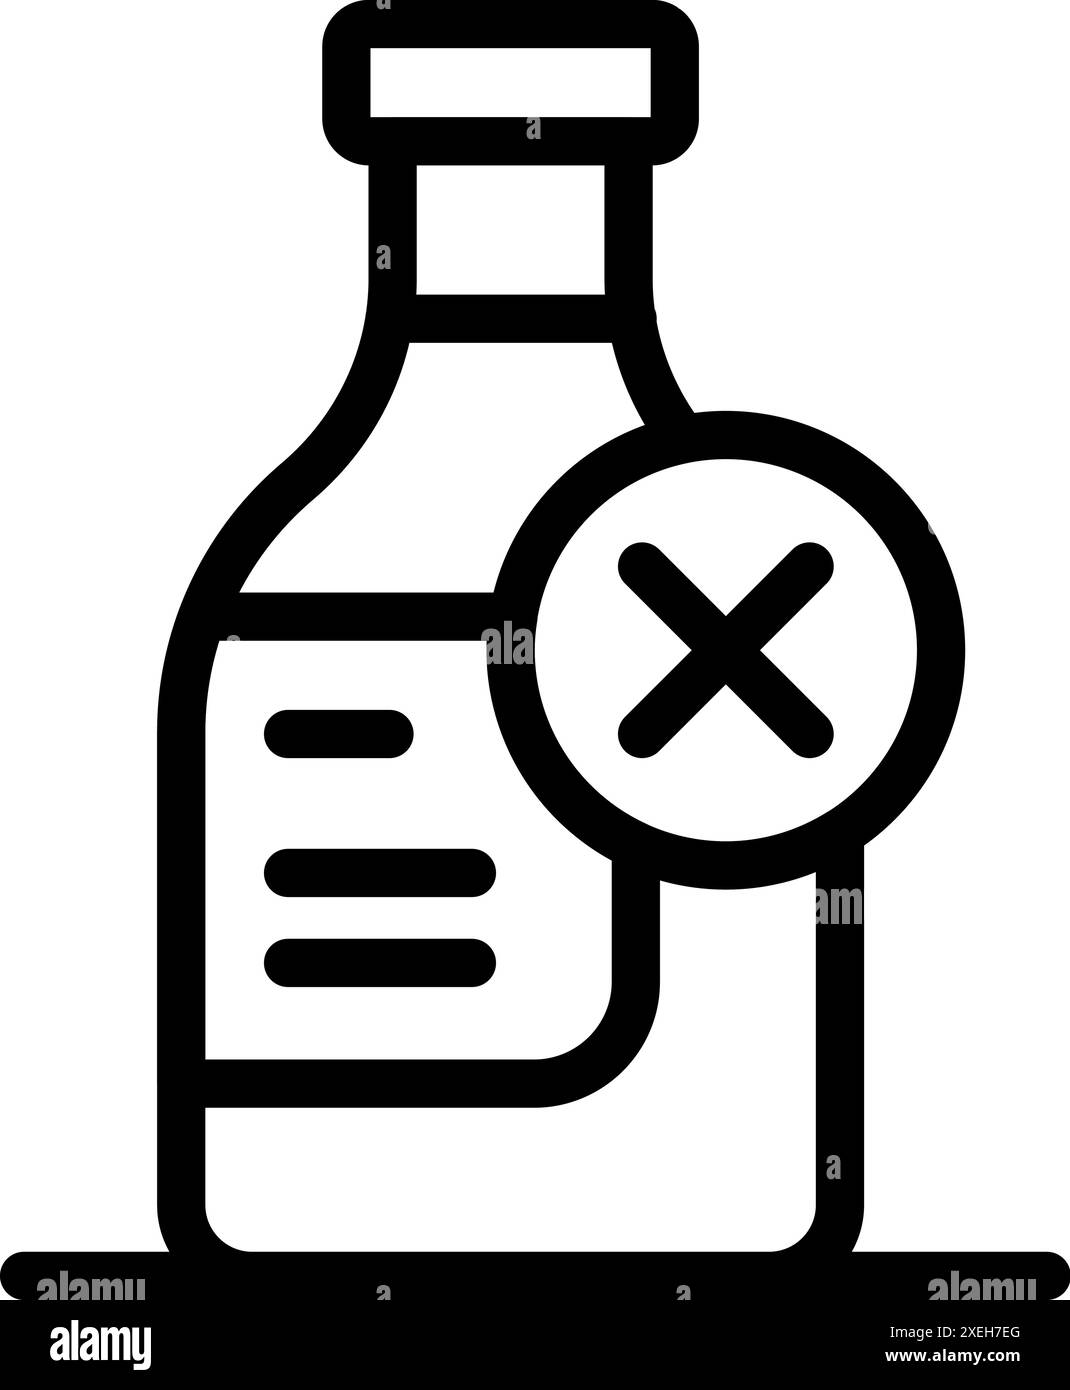 Line icon of a bottle with a cross in a circle, representing the concept of no alcohol Stock Vector